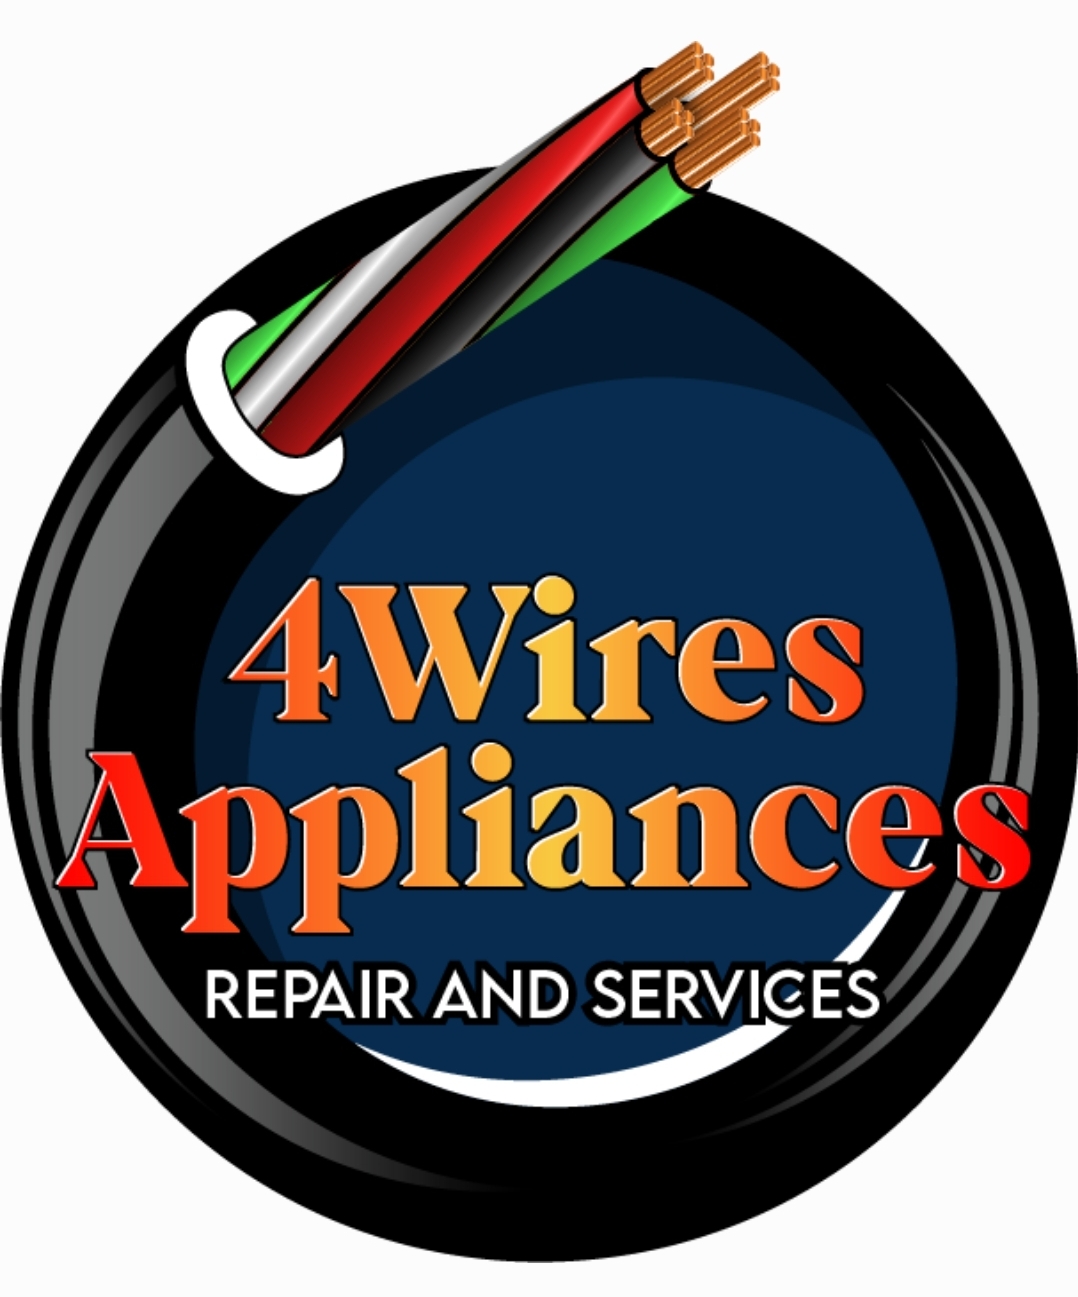 4Wires Appliances Repair and Services Logo